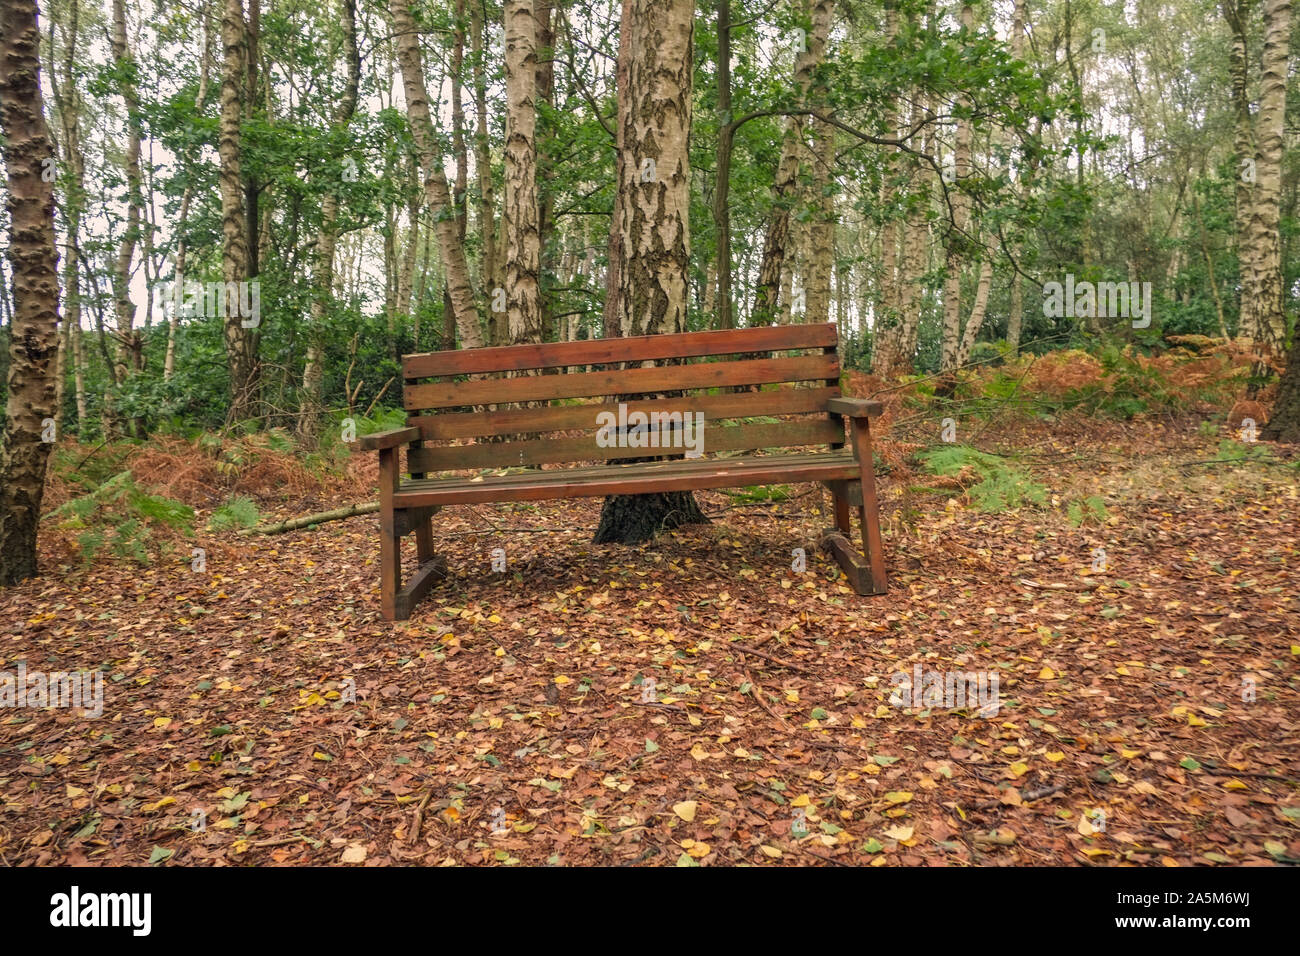 Bench seating area in woodland United Kingdom. Stock Photo